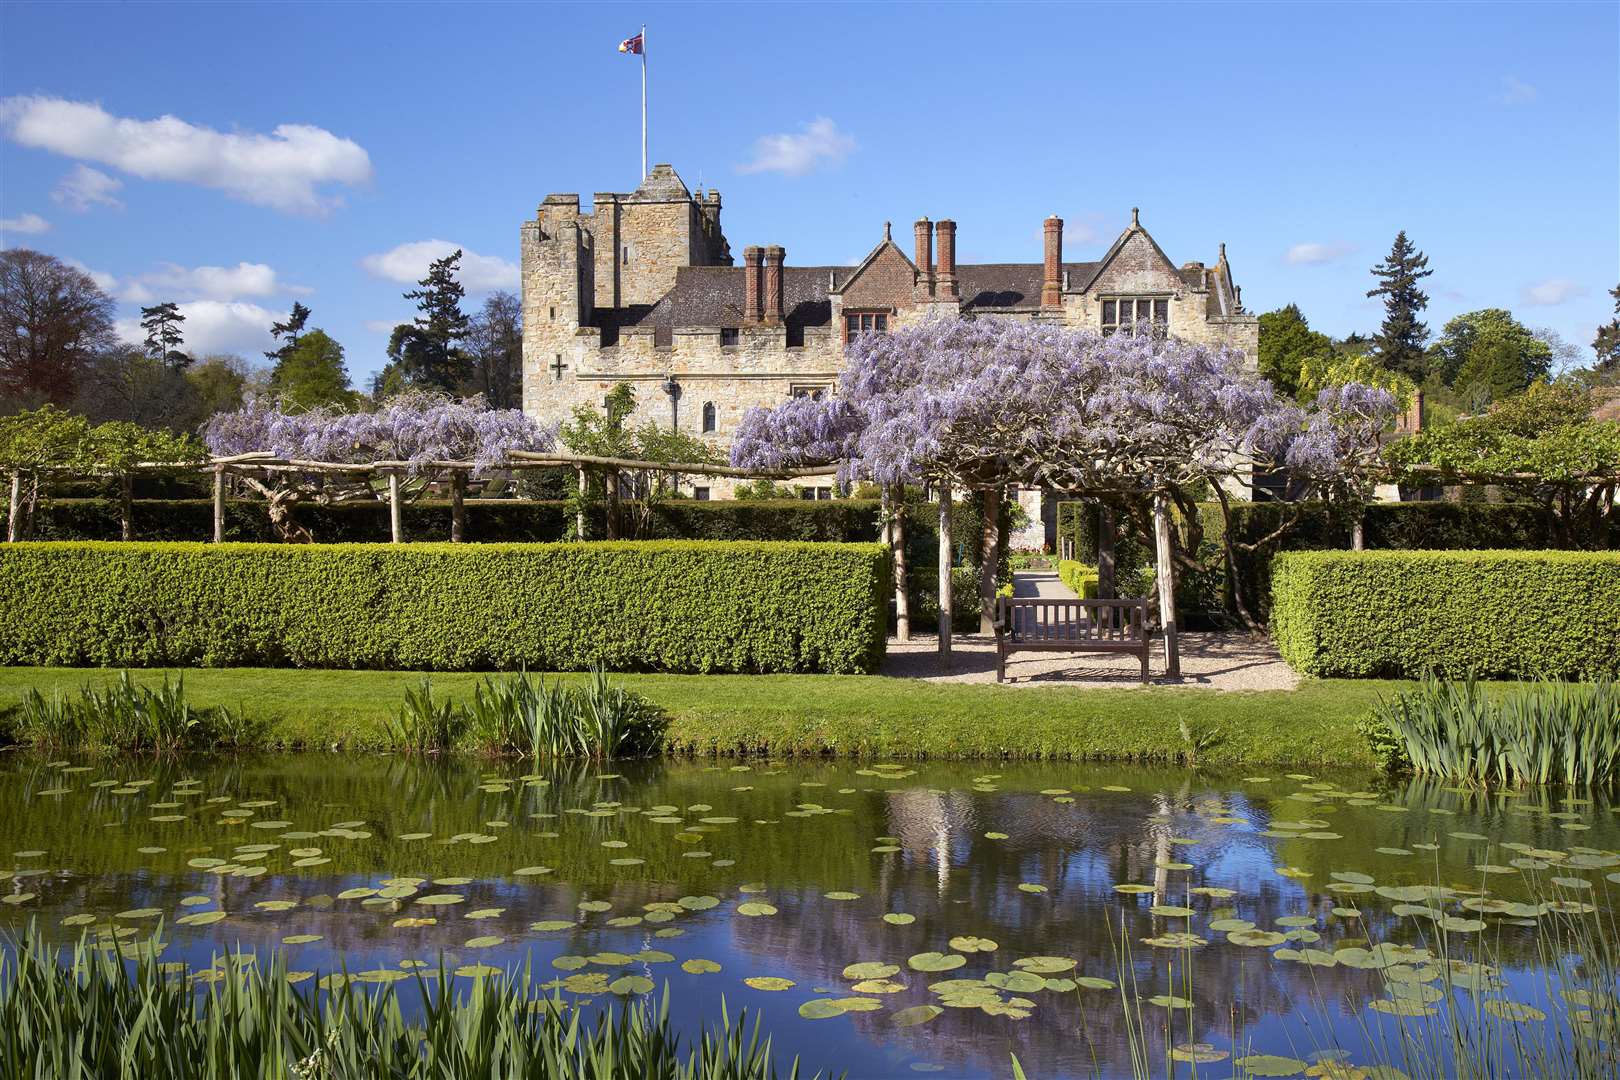 Vivid greens and stunning purples of late spring with the wisteria and the castle as a backdrop